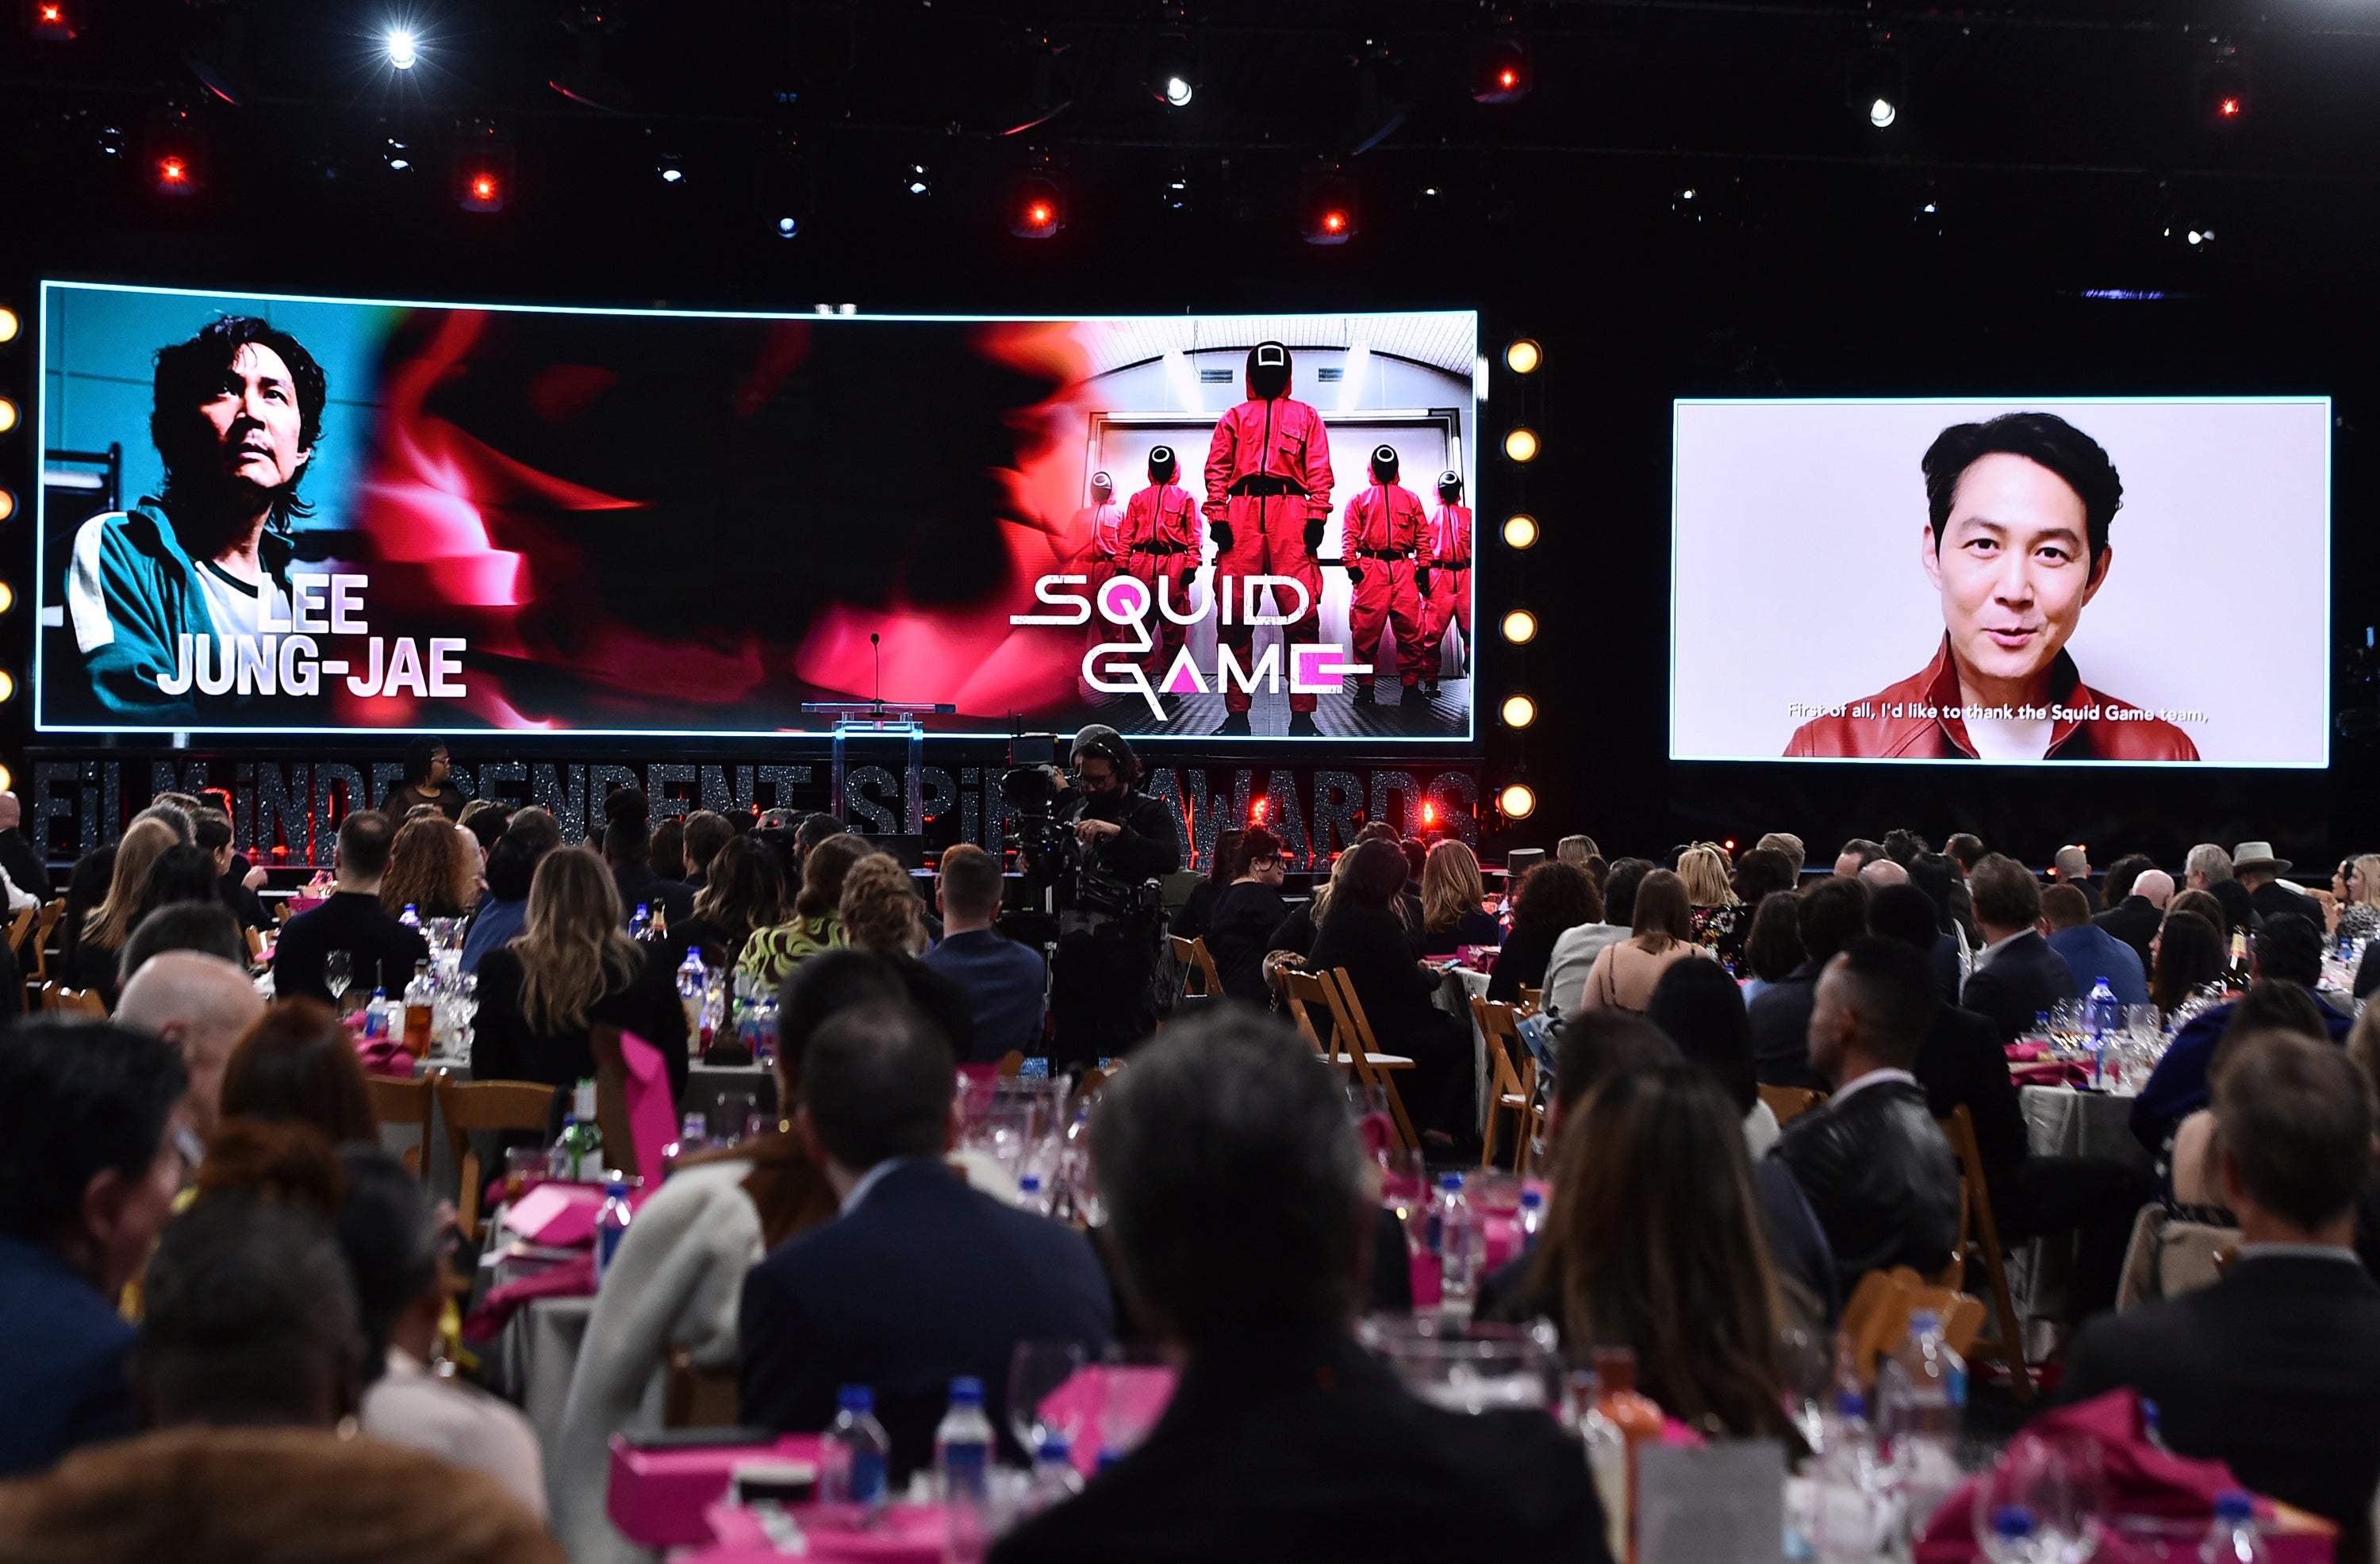 Korean dystopian film Squid Game became a smash hit for Netflix when it was released in 2021, winning multiple awards. The series displayed Netflix's commitment not just to the U.S. market but overseas. (Photo: Jordan Strauss/Invision, AP)